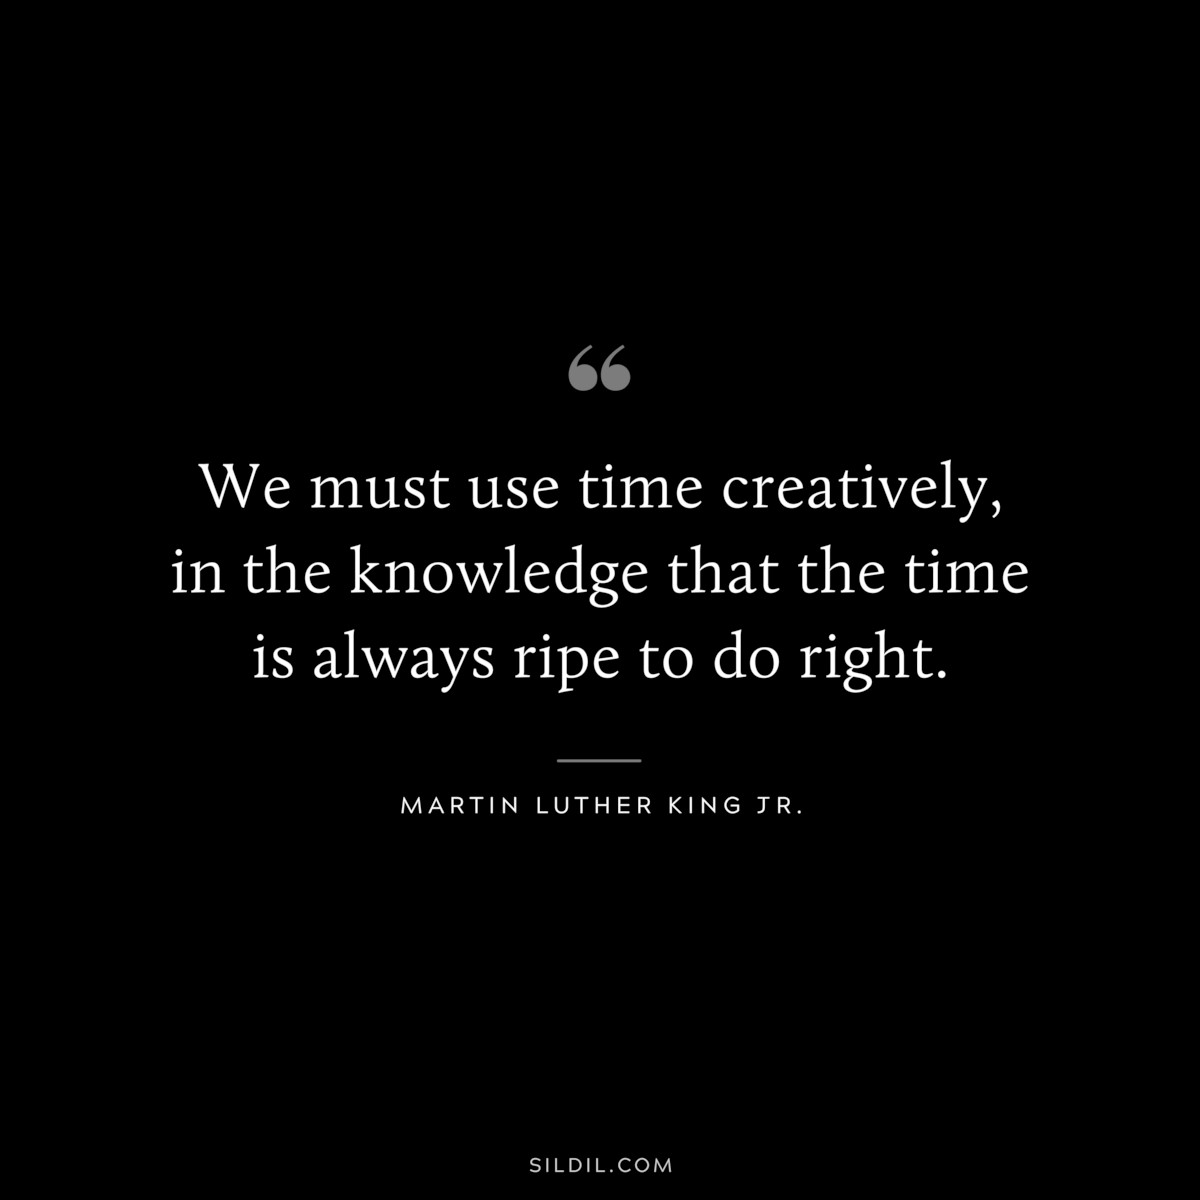 We must use time creatively, in the knowledge that the time is always ripe to do right. ― Martin Luther King Jr.